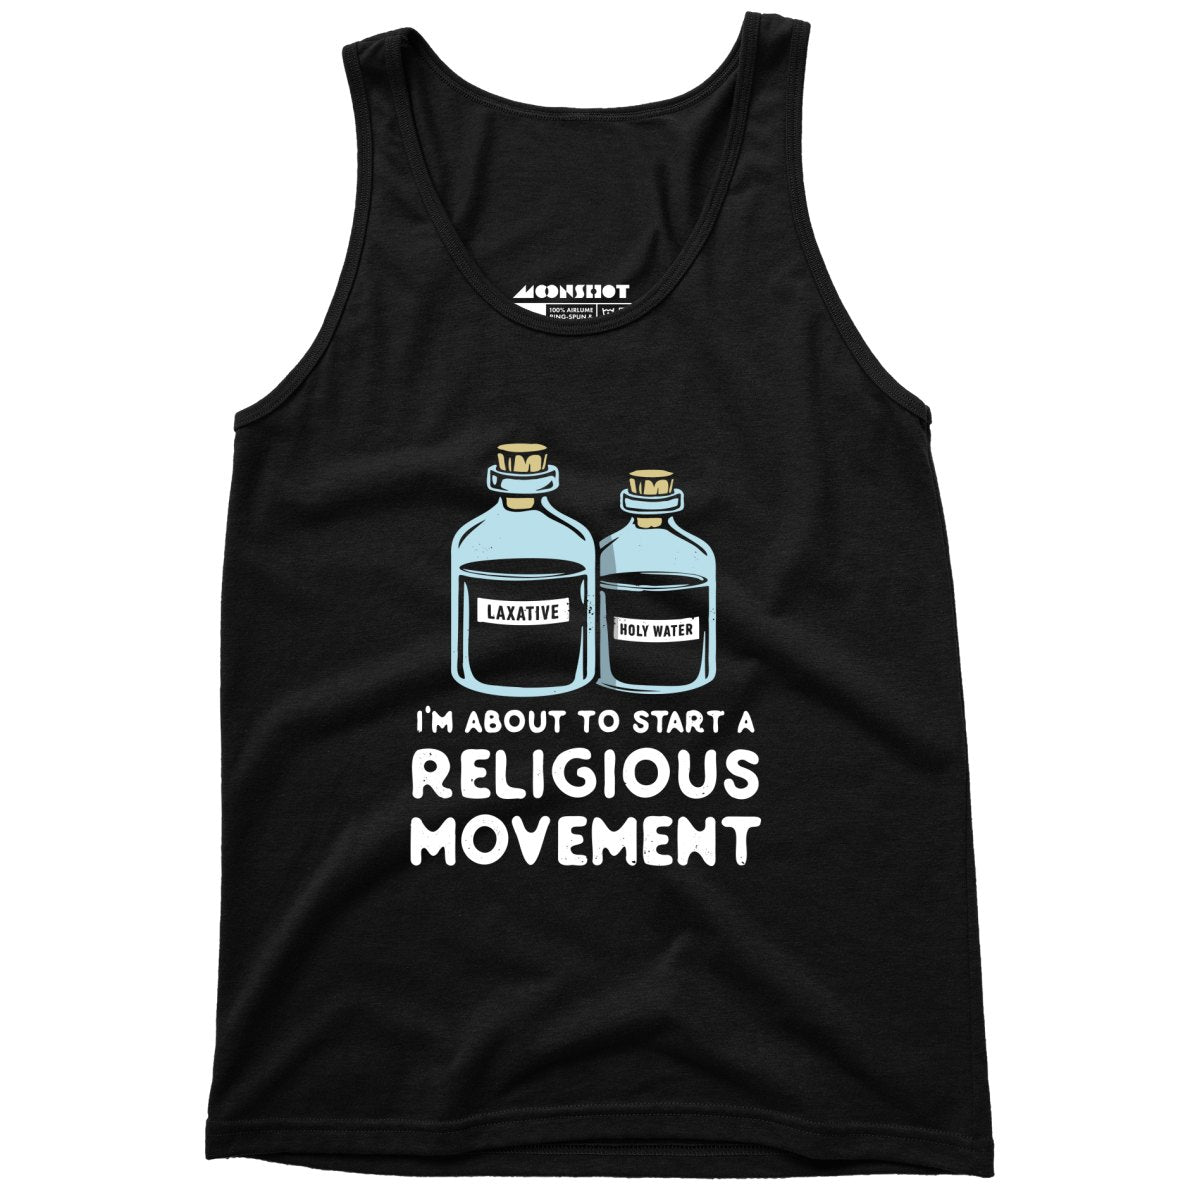 I'm About to Start a Religious Movement - Unisex Tank Top